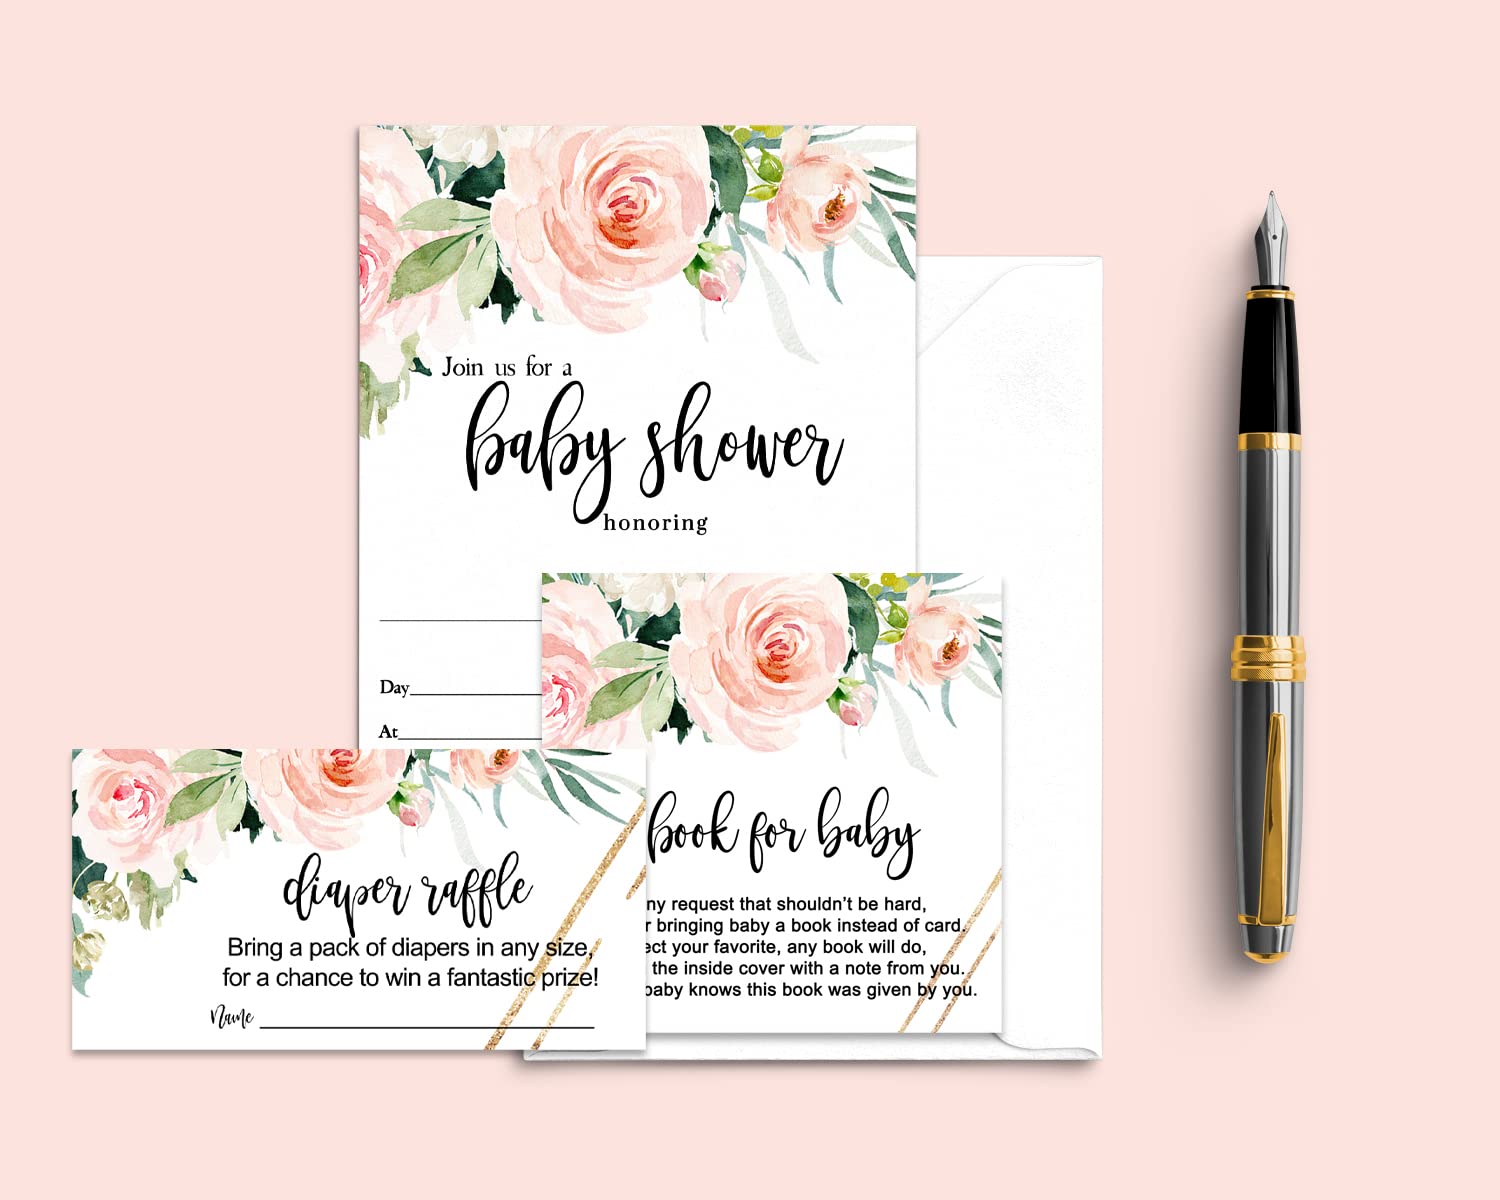 Graceful Floral Baby Shower Bundle (25 Guests) Pack Includes Diaper Raffle Insert, Bring a Book Cards, Blank Invites and Envelopes – Rustic Theme Pink and Gold – Perfect for Girls Printed Kit